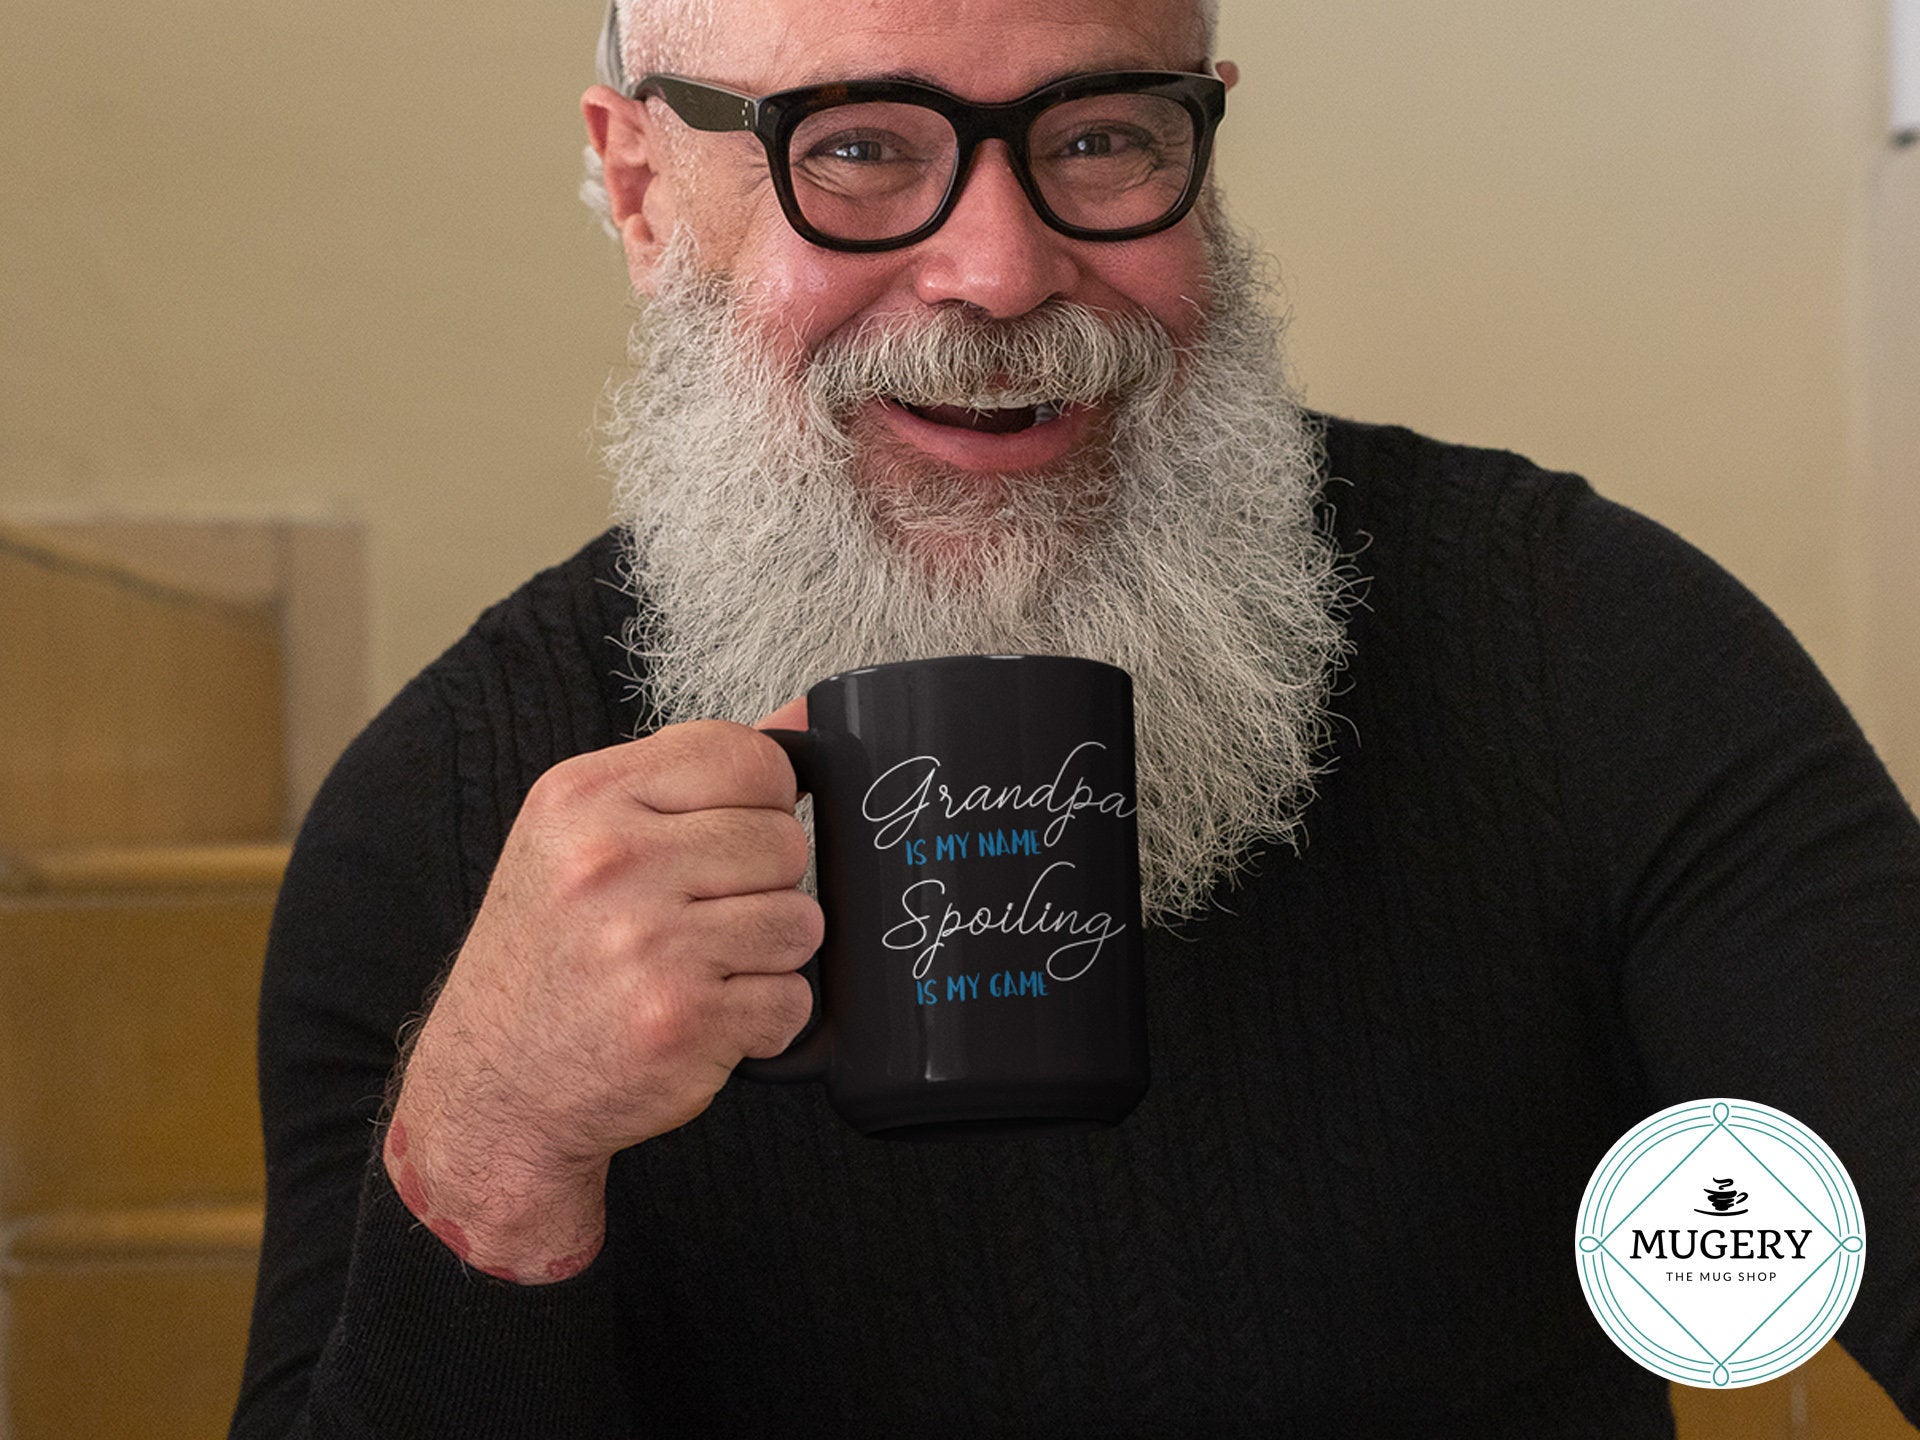 Grandpa is My Name Spoiling is My Game Mug - Guestbookery